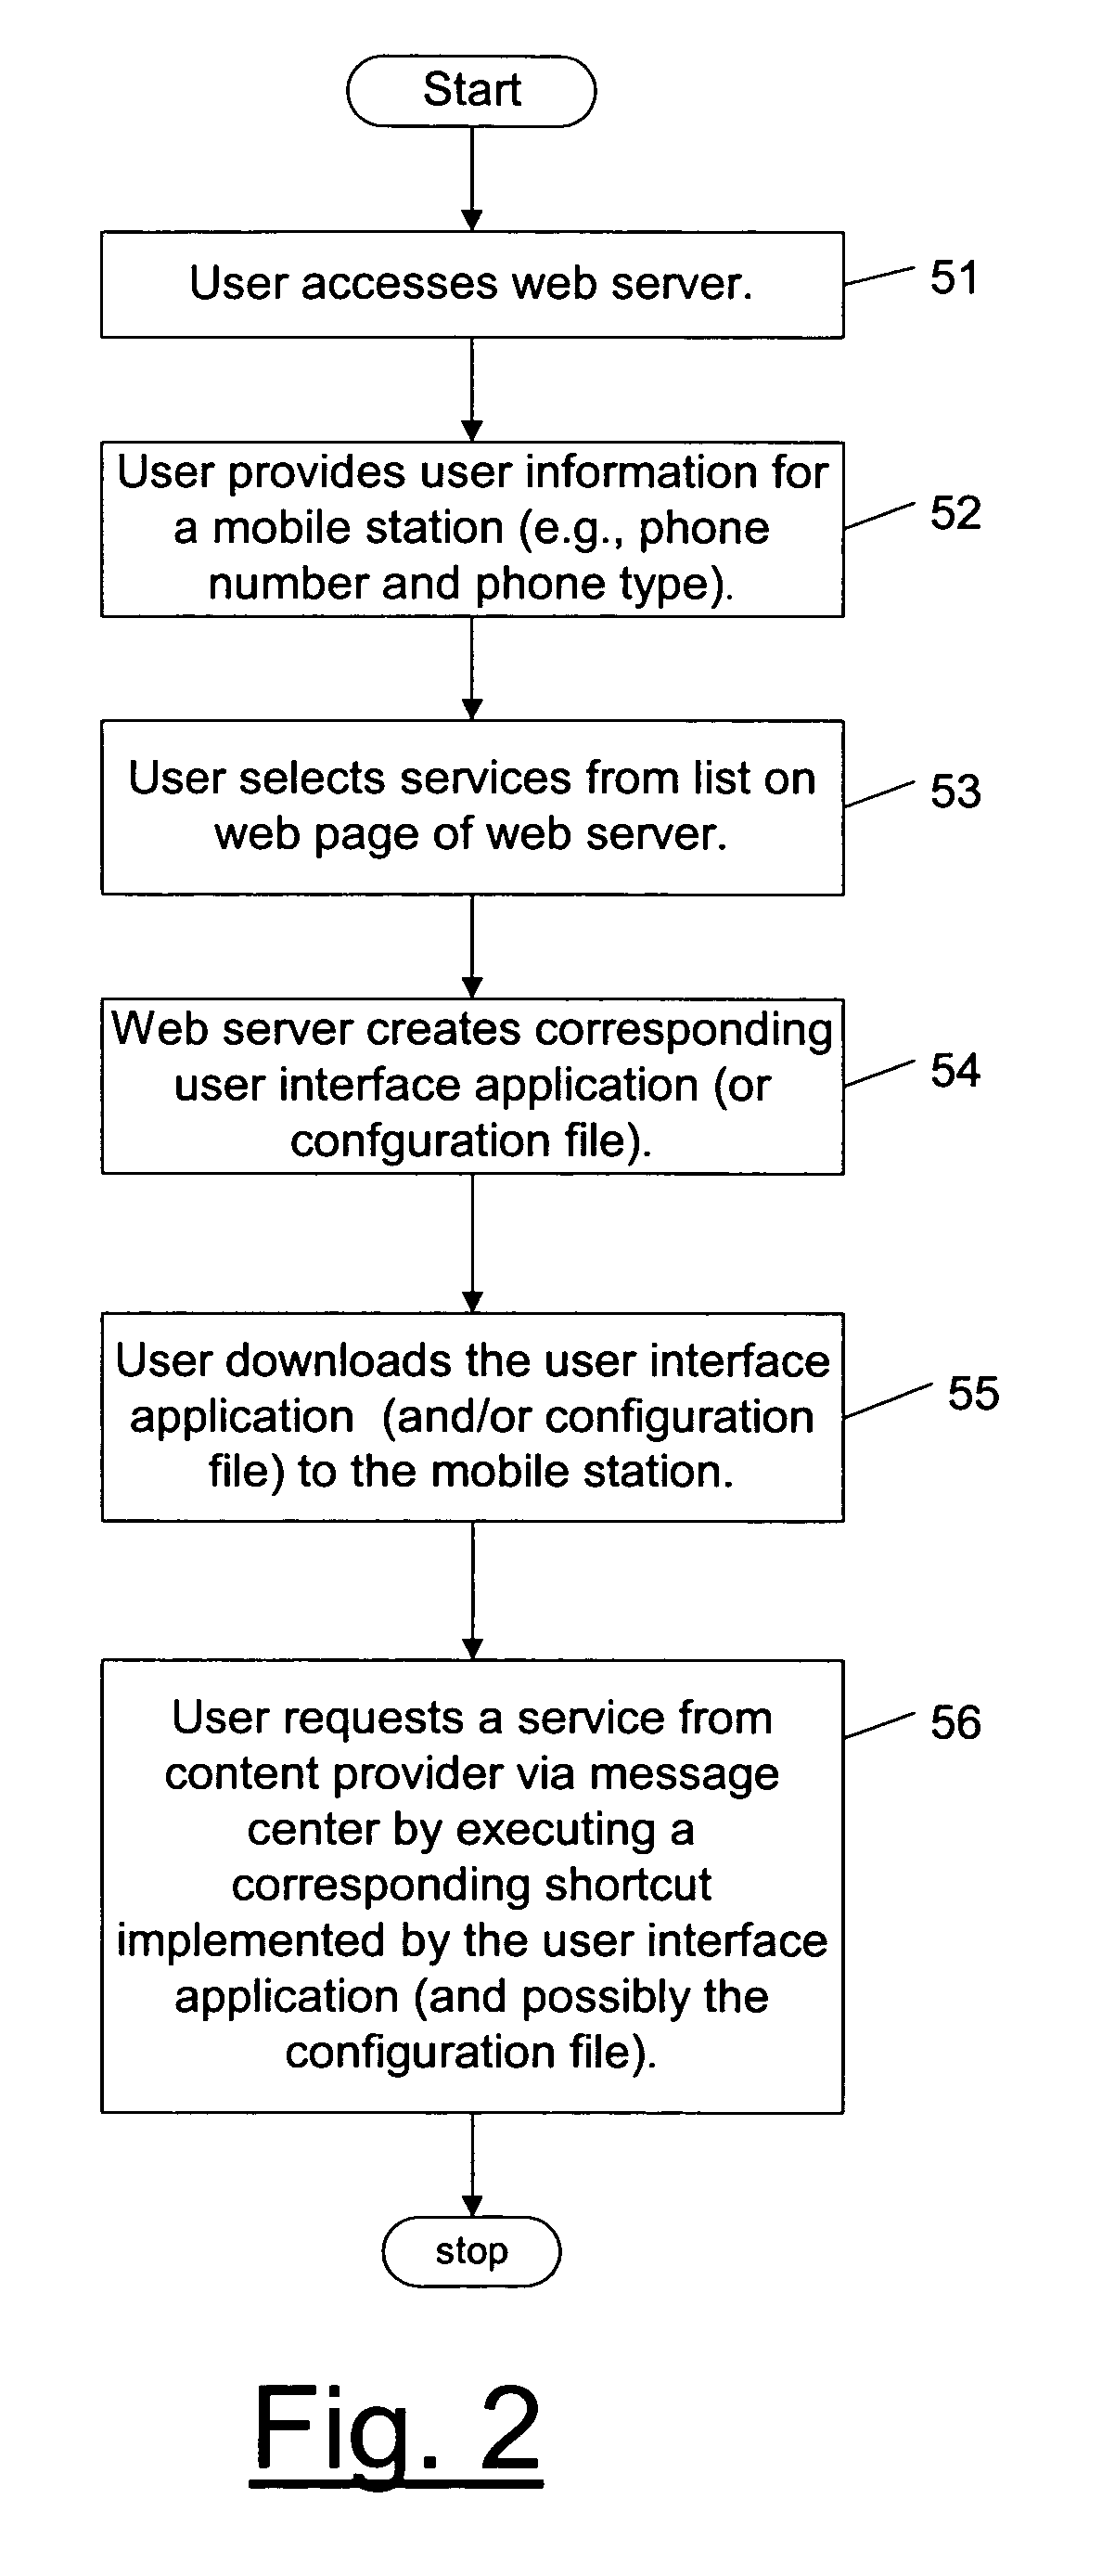 Shortcut generator for services accessible via a messaging service system